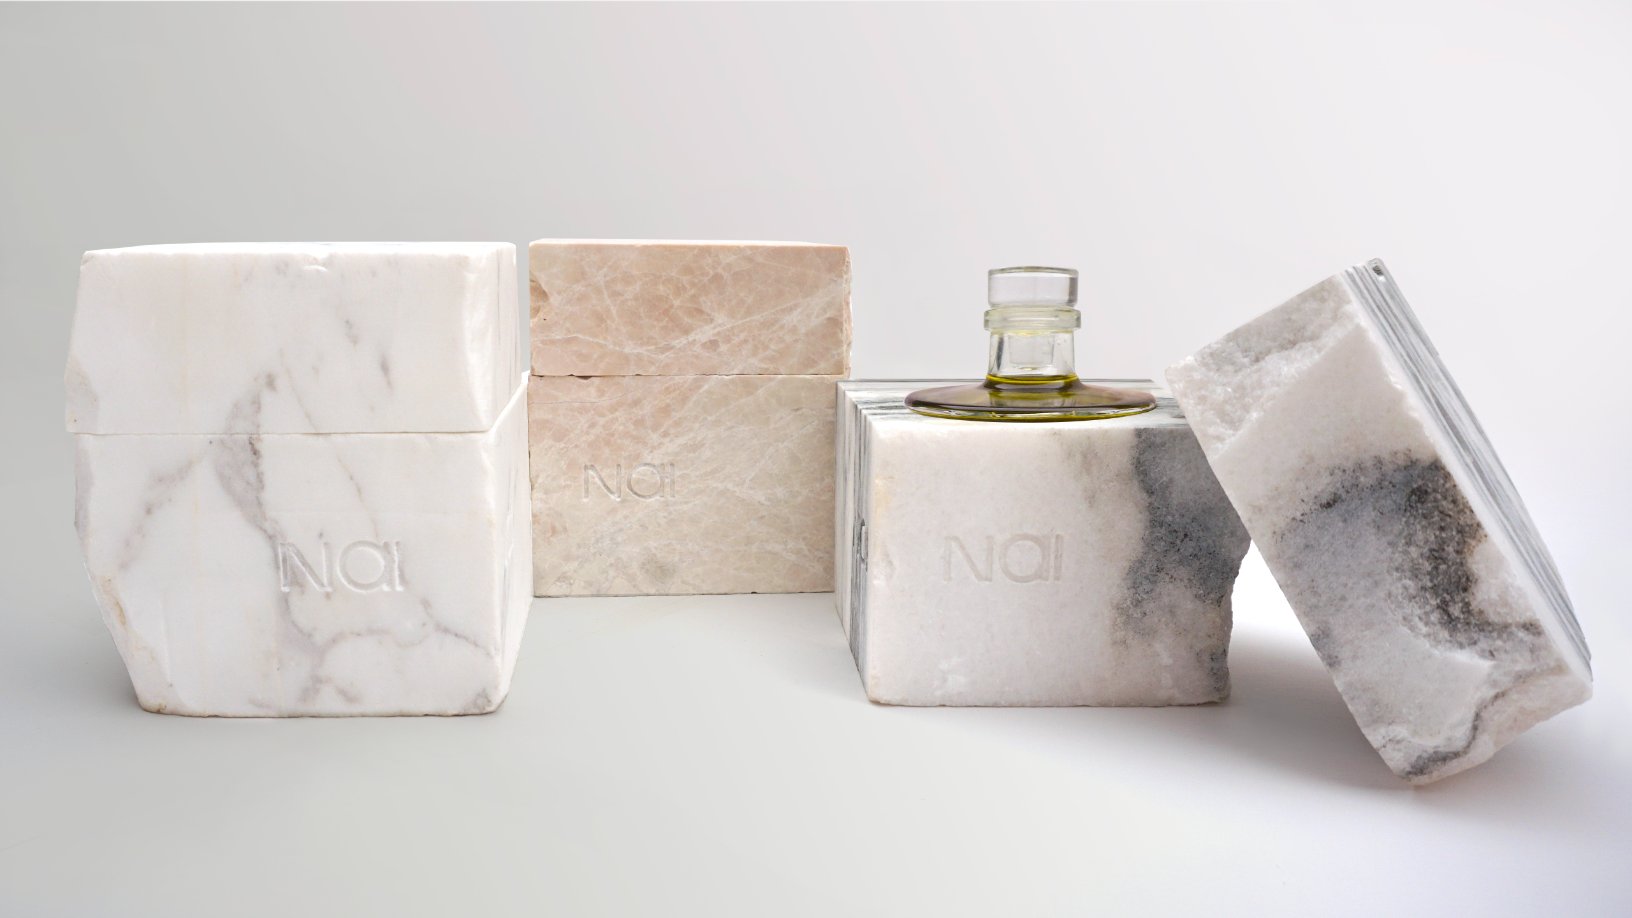 A Classic Art History “Failure” Inspired the Divine Marble Design of NAI’s Olive Oil